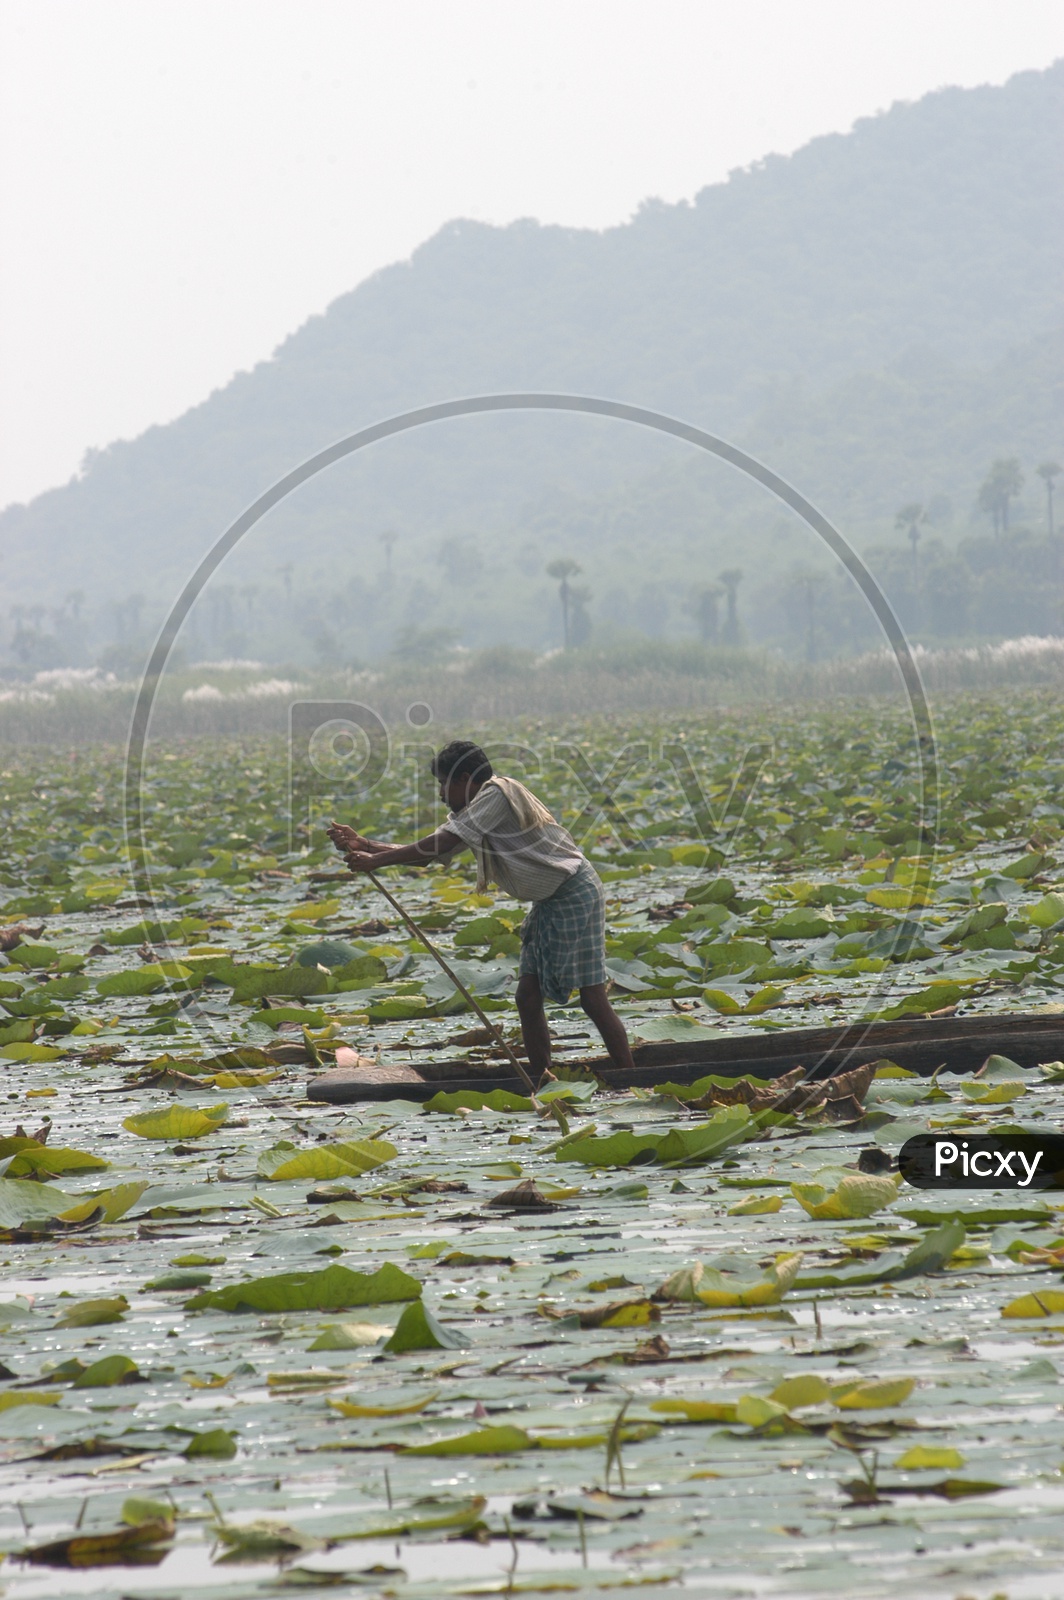 tribal People Collecting Lotus Flowers From a Pond in a Boat